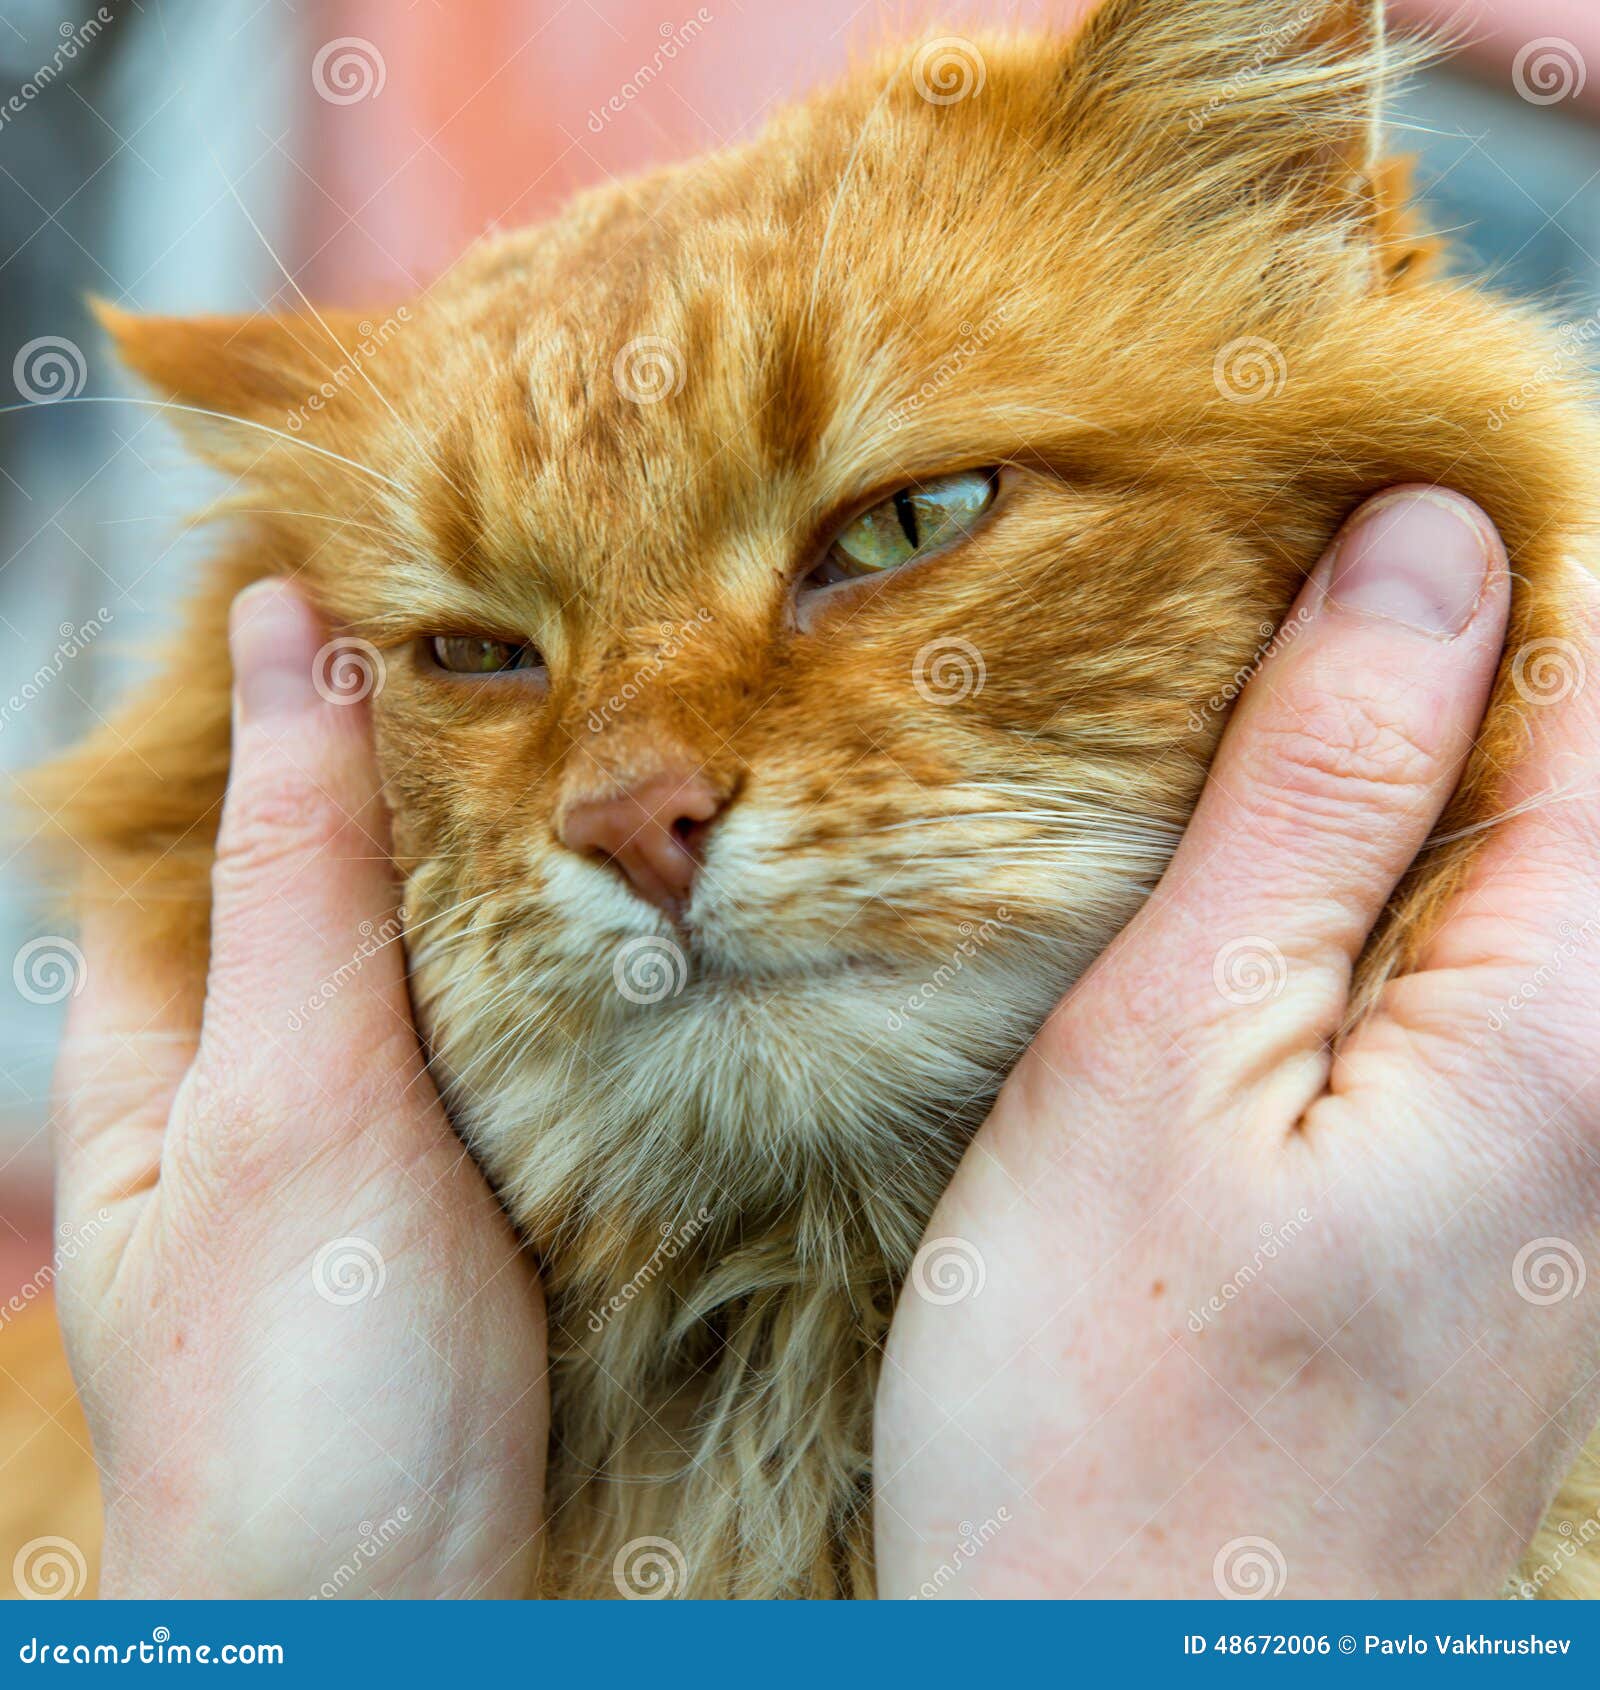 Red cat with green eyes stock photo. Image of hair, kitten - 48672006